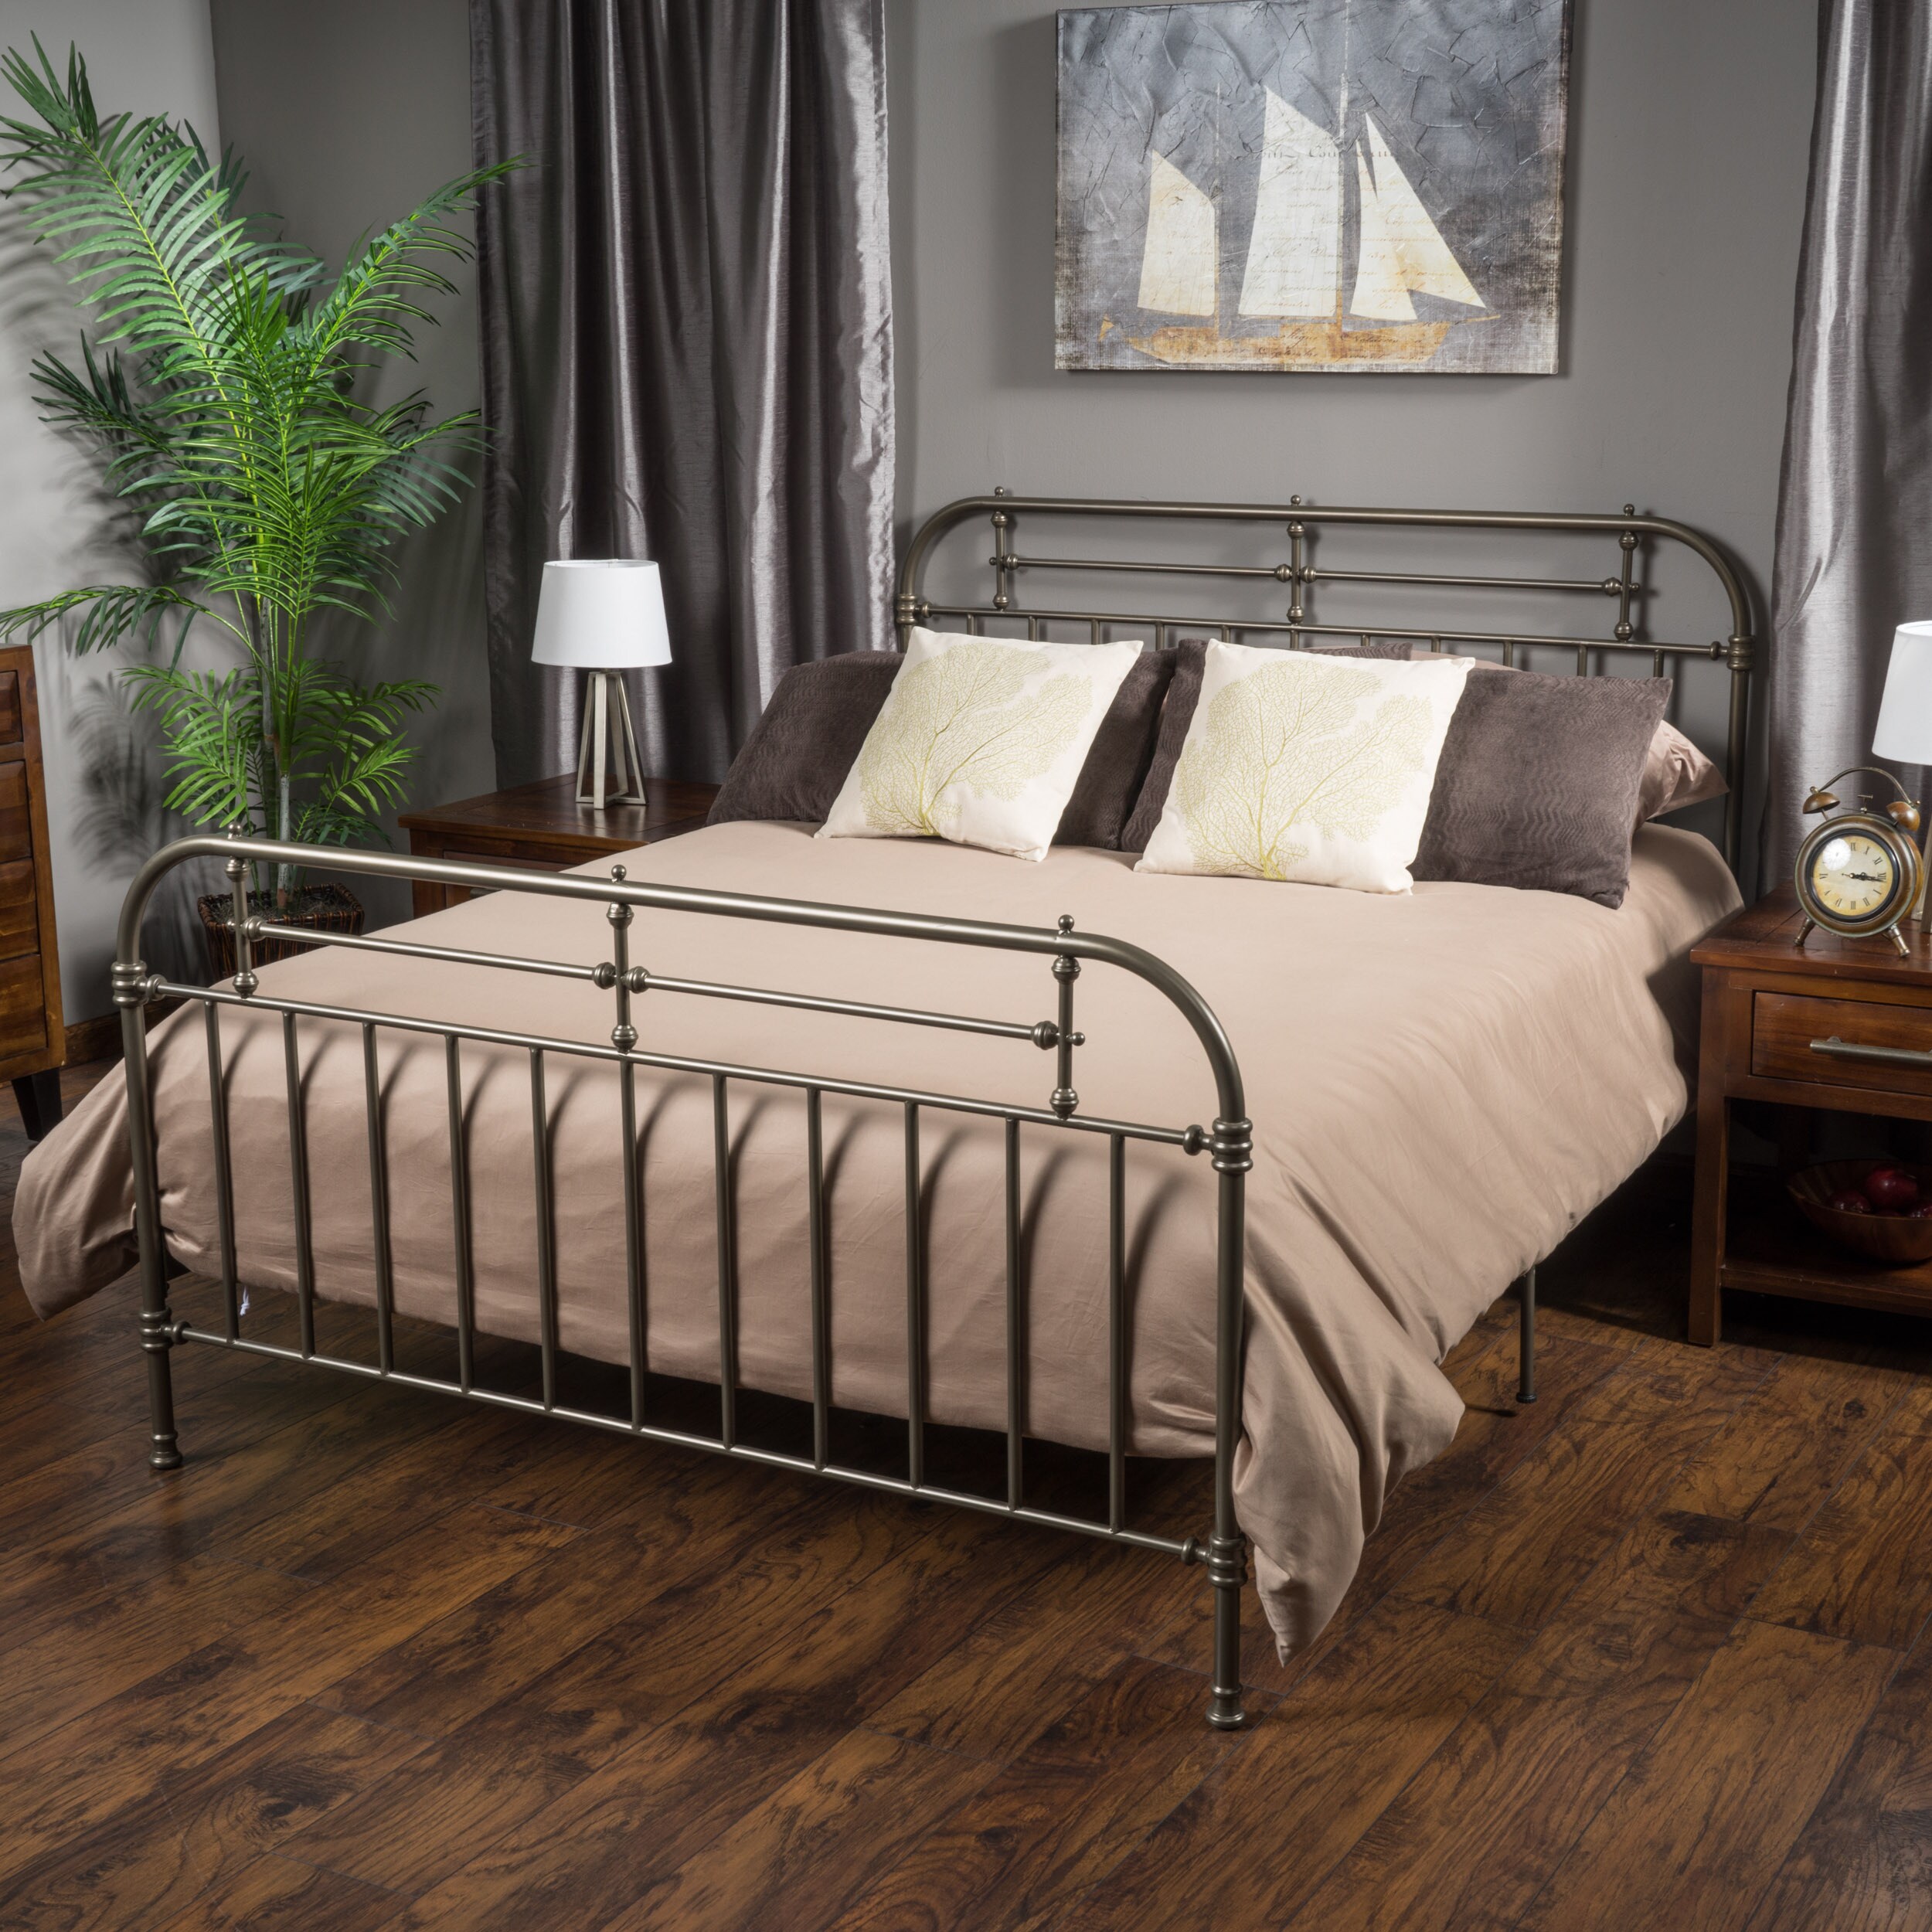 Christopher Knight Home Nathan King Size Metal Bed Frame by